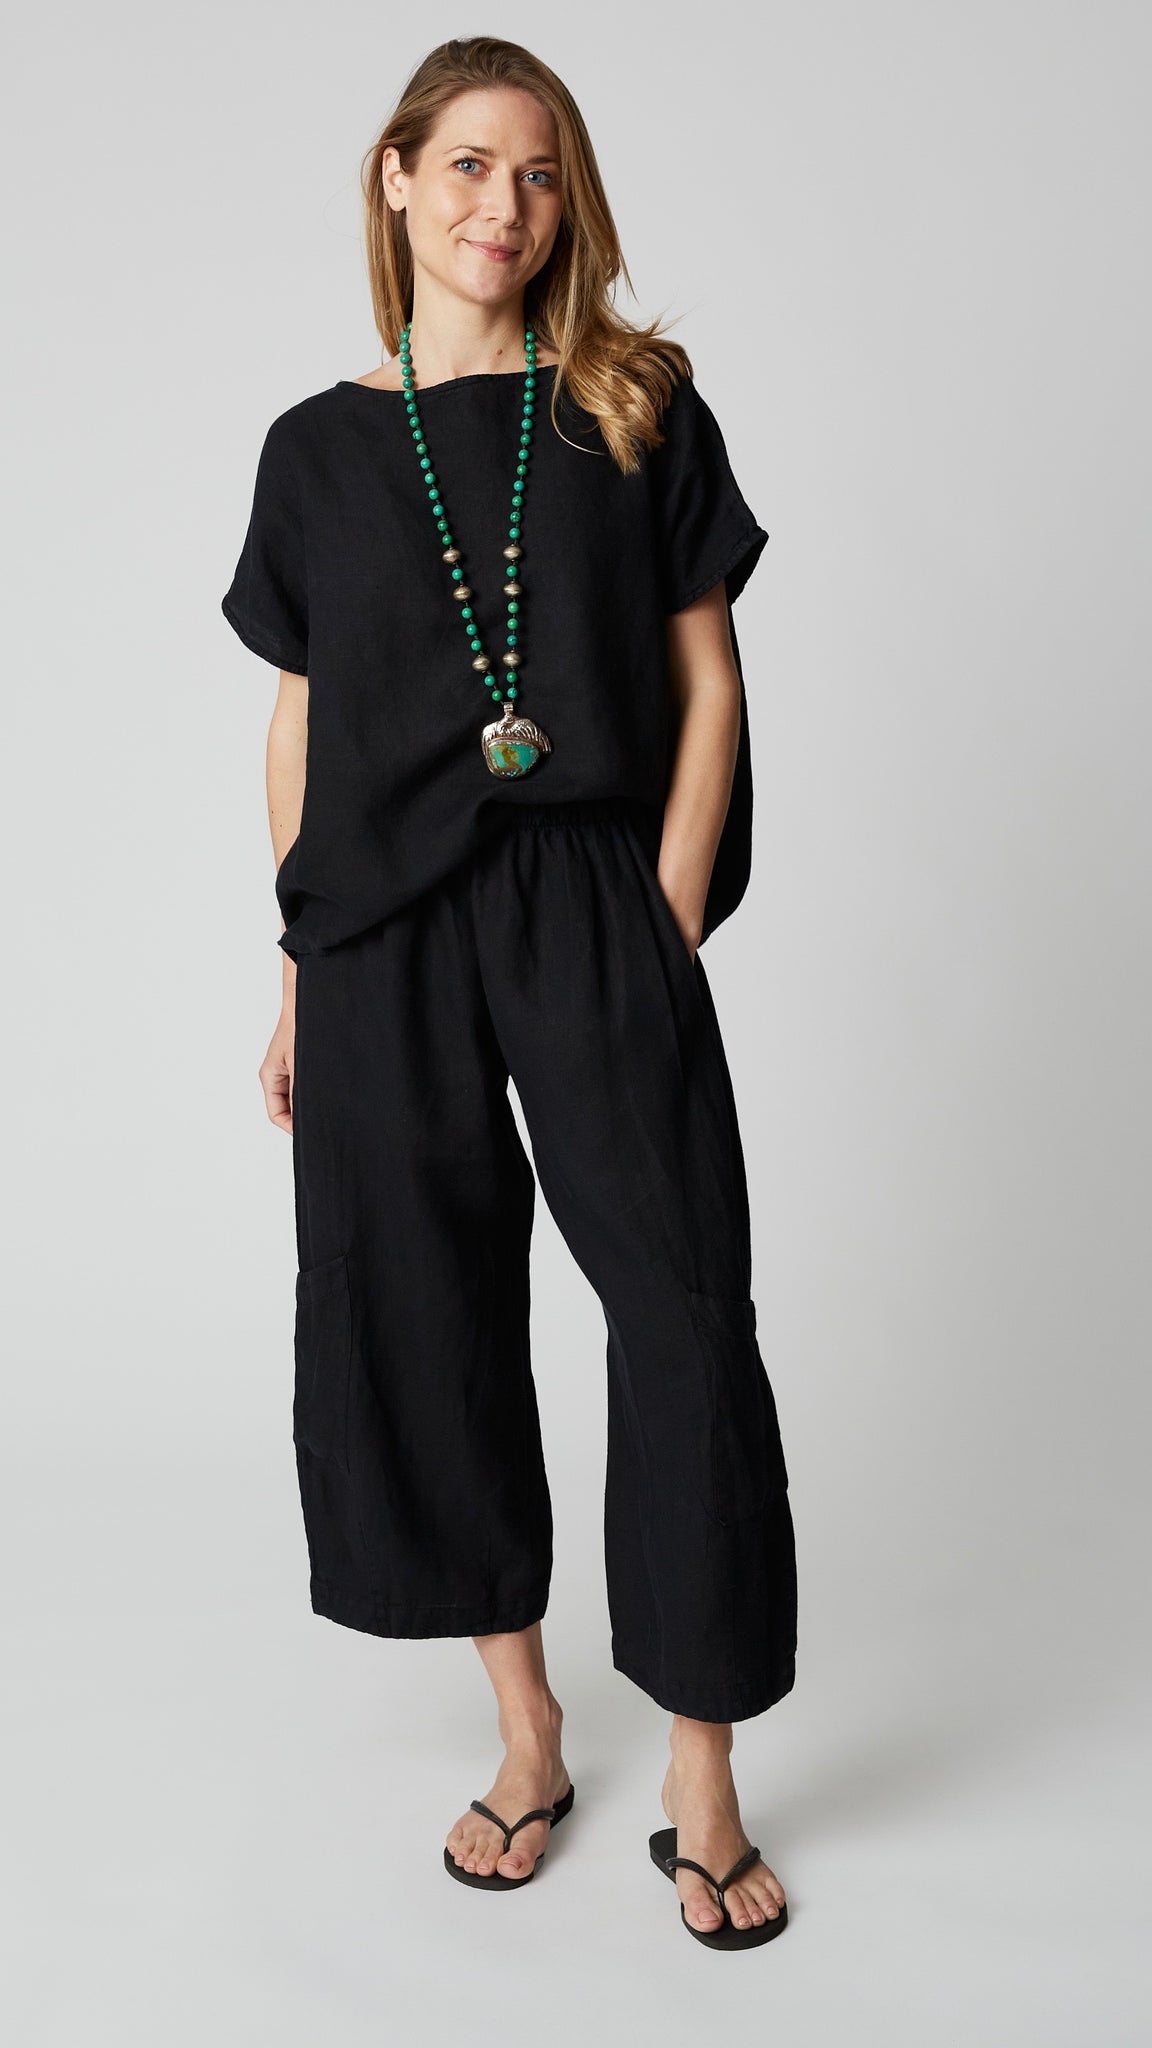 Model wearing black boxy cap-sleeve top with scoop neck, black linen cropped pant , turquoise necklace, and black flip-flops.